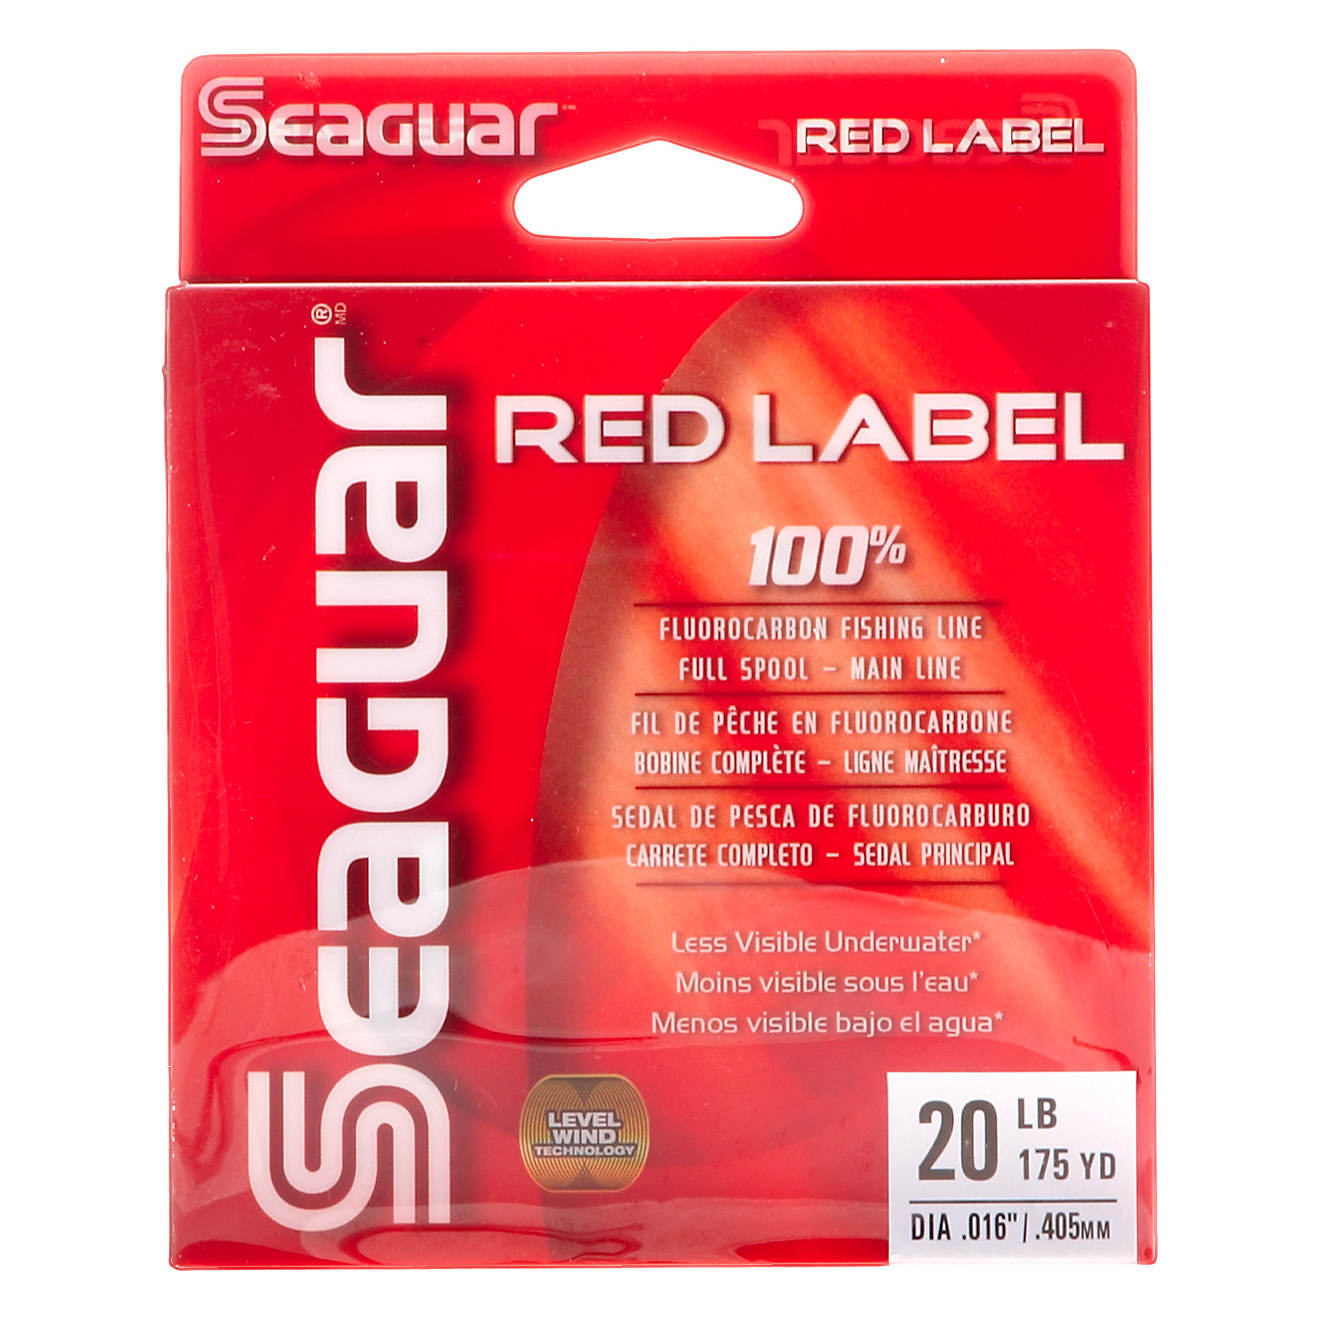 Seaguar® Red Label 20 lb. - 175 yards Fluorocarbon Fishing Line                                                                 - view number 1